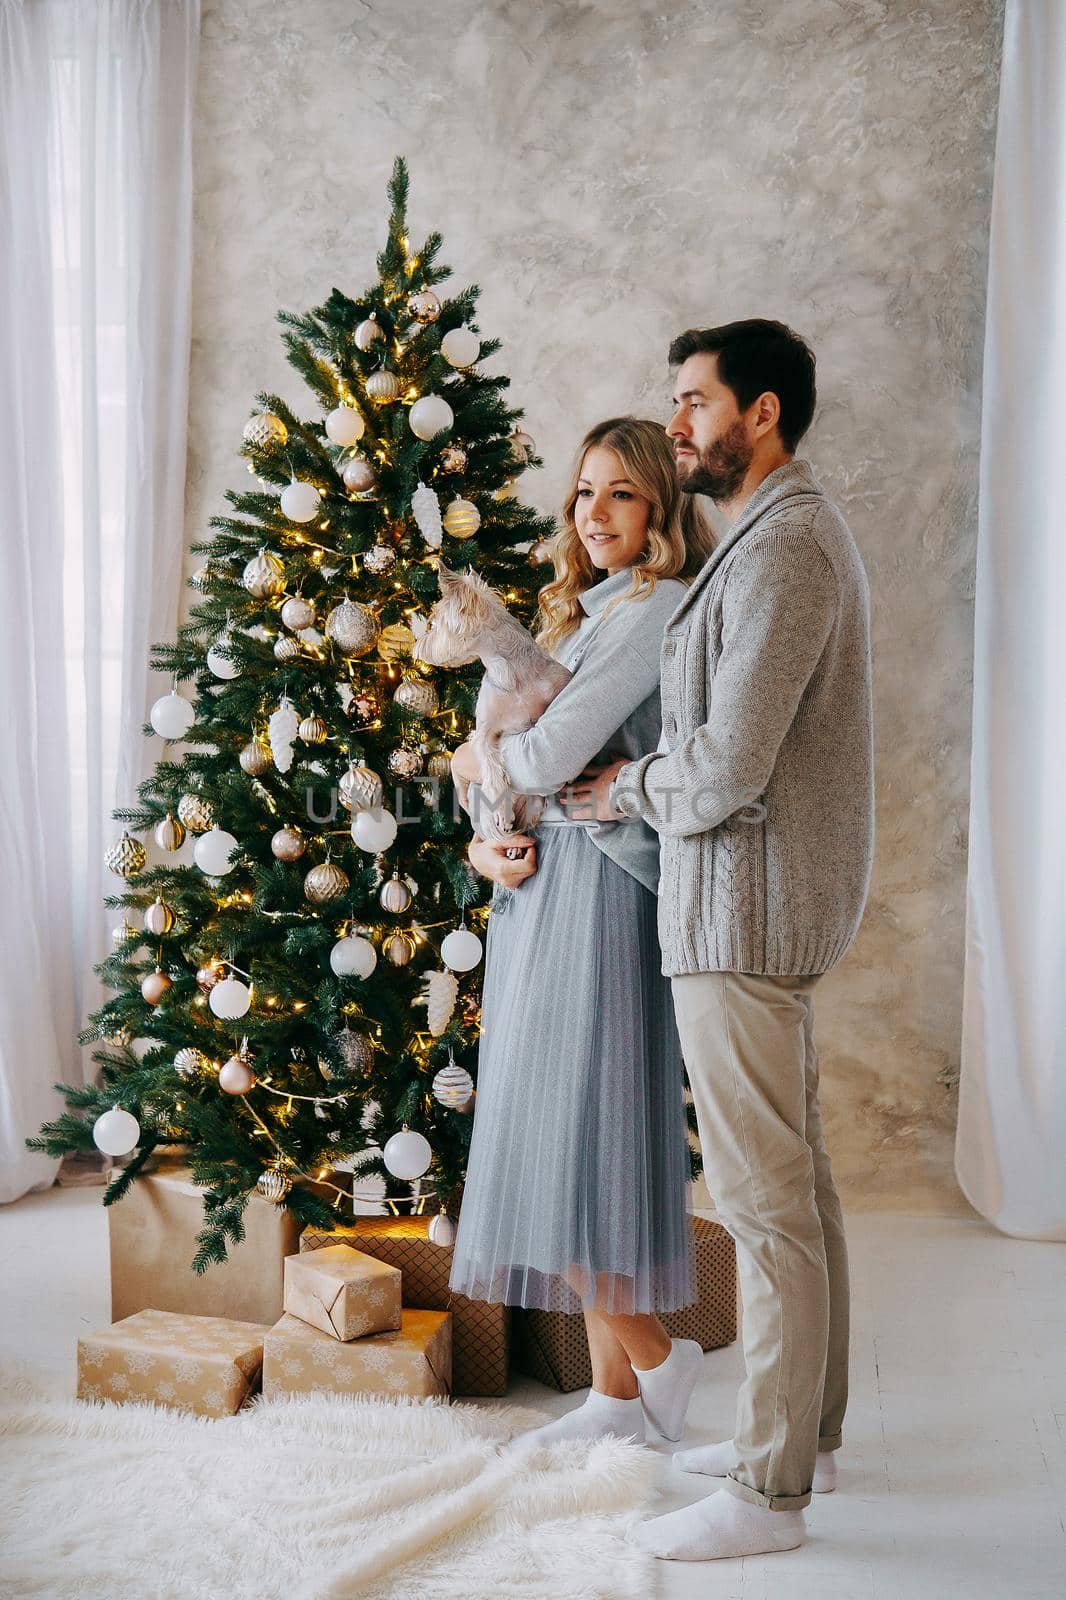 A happy couple in love - a man and a woman. A family in a bright New Year's interior with a Christmas tree by Annu1tochka